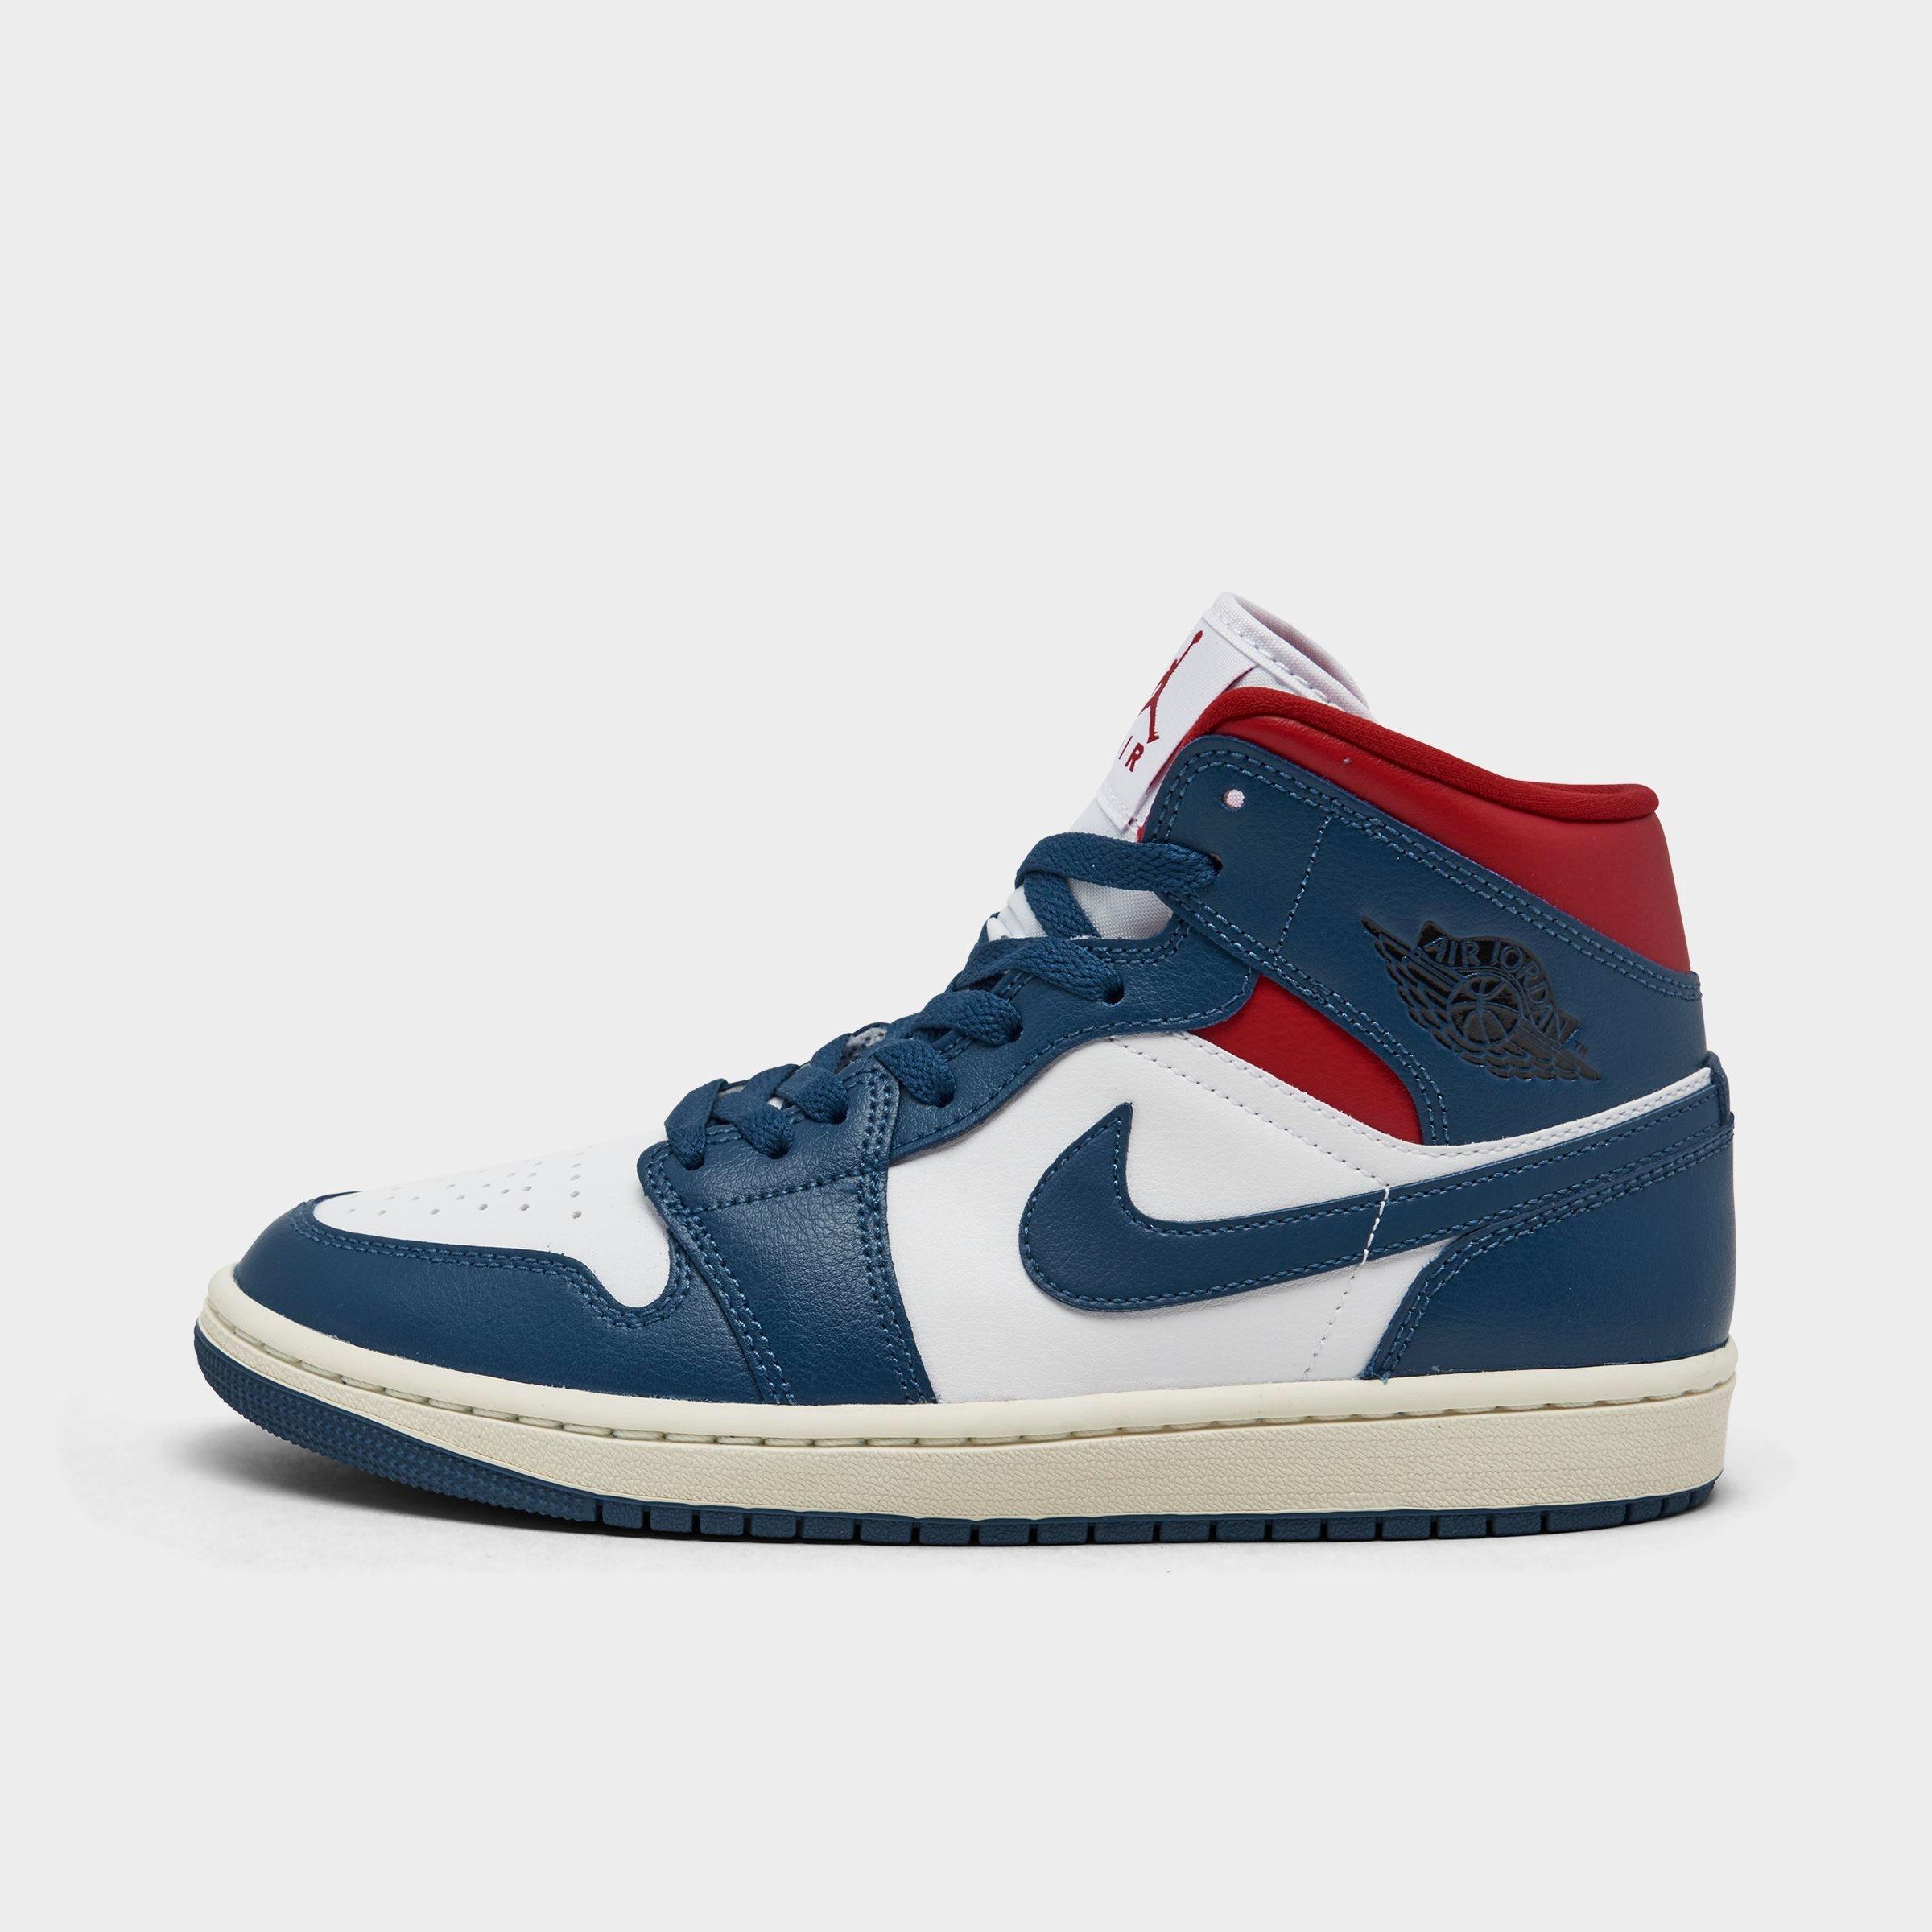 Nike Women's Air Jordan Retro 1 Mid Casual Shoes In White/french Blue/gym Red/sail/black